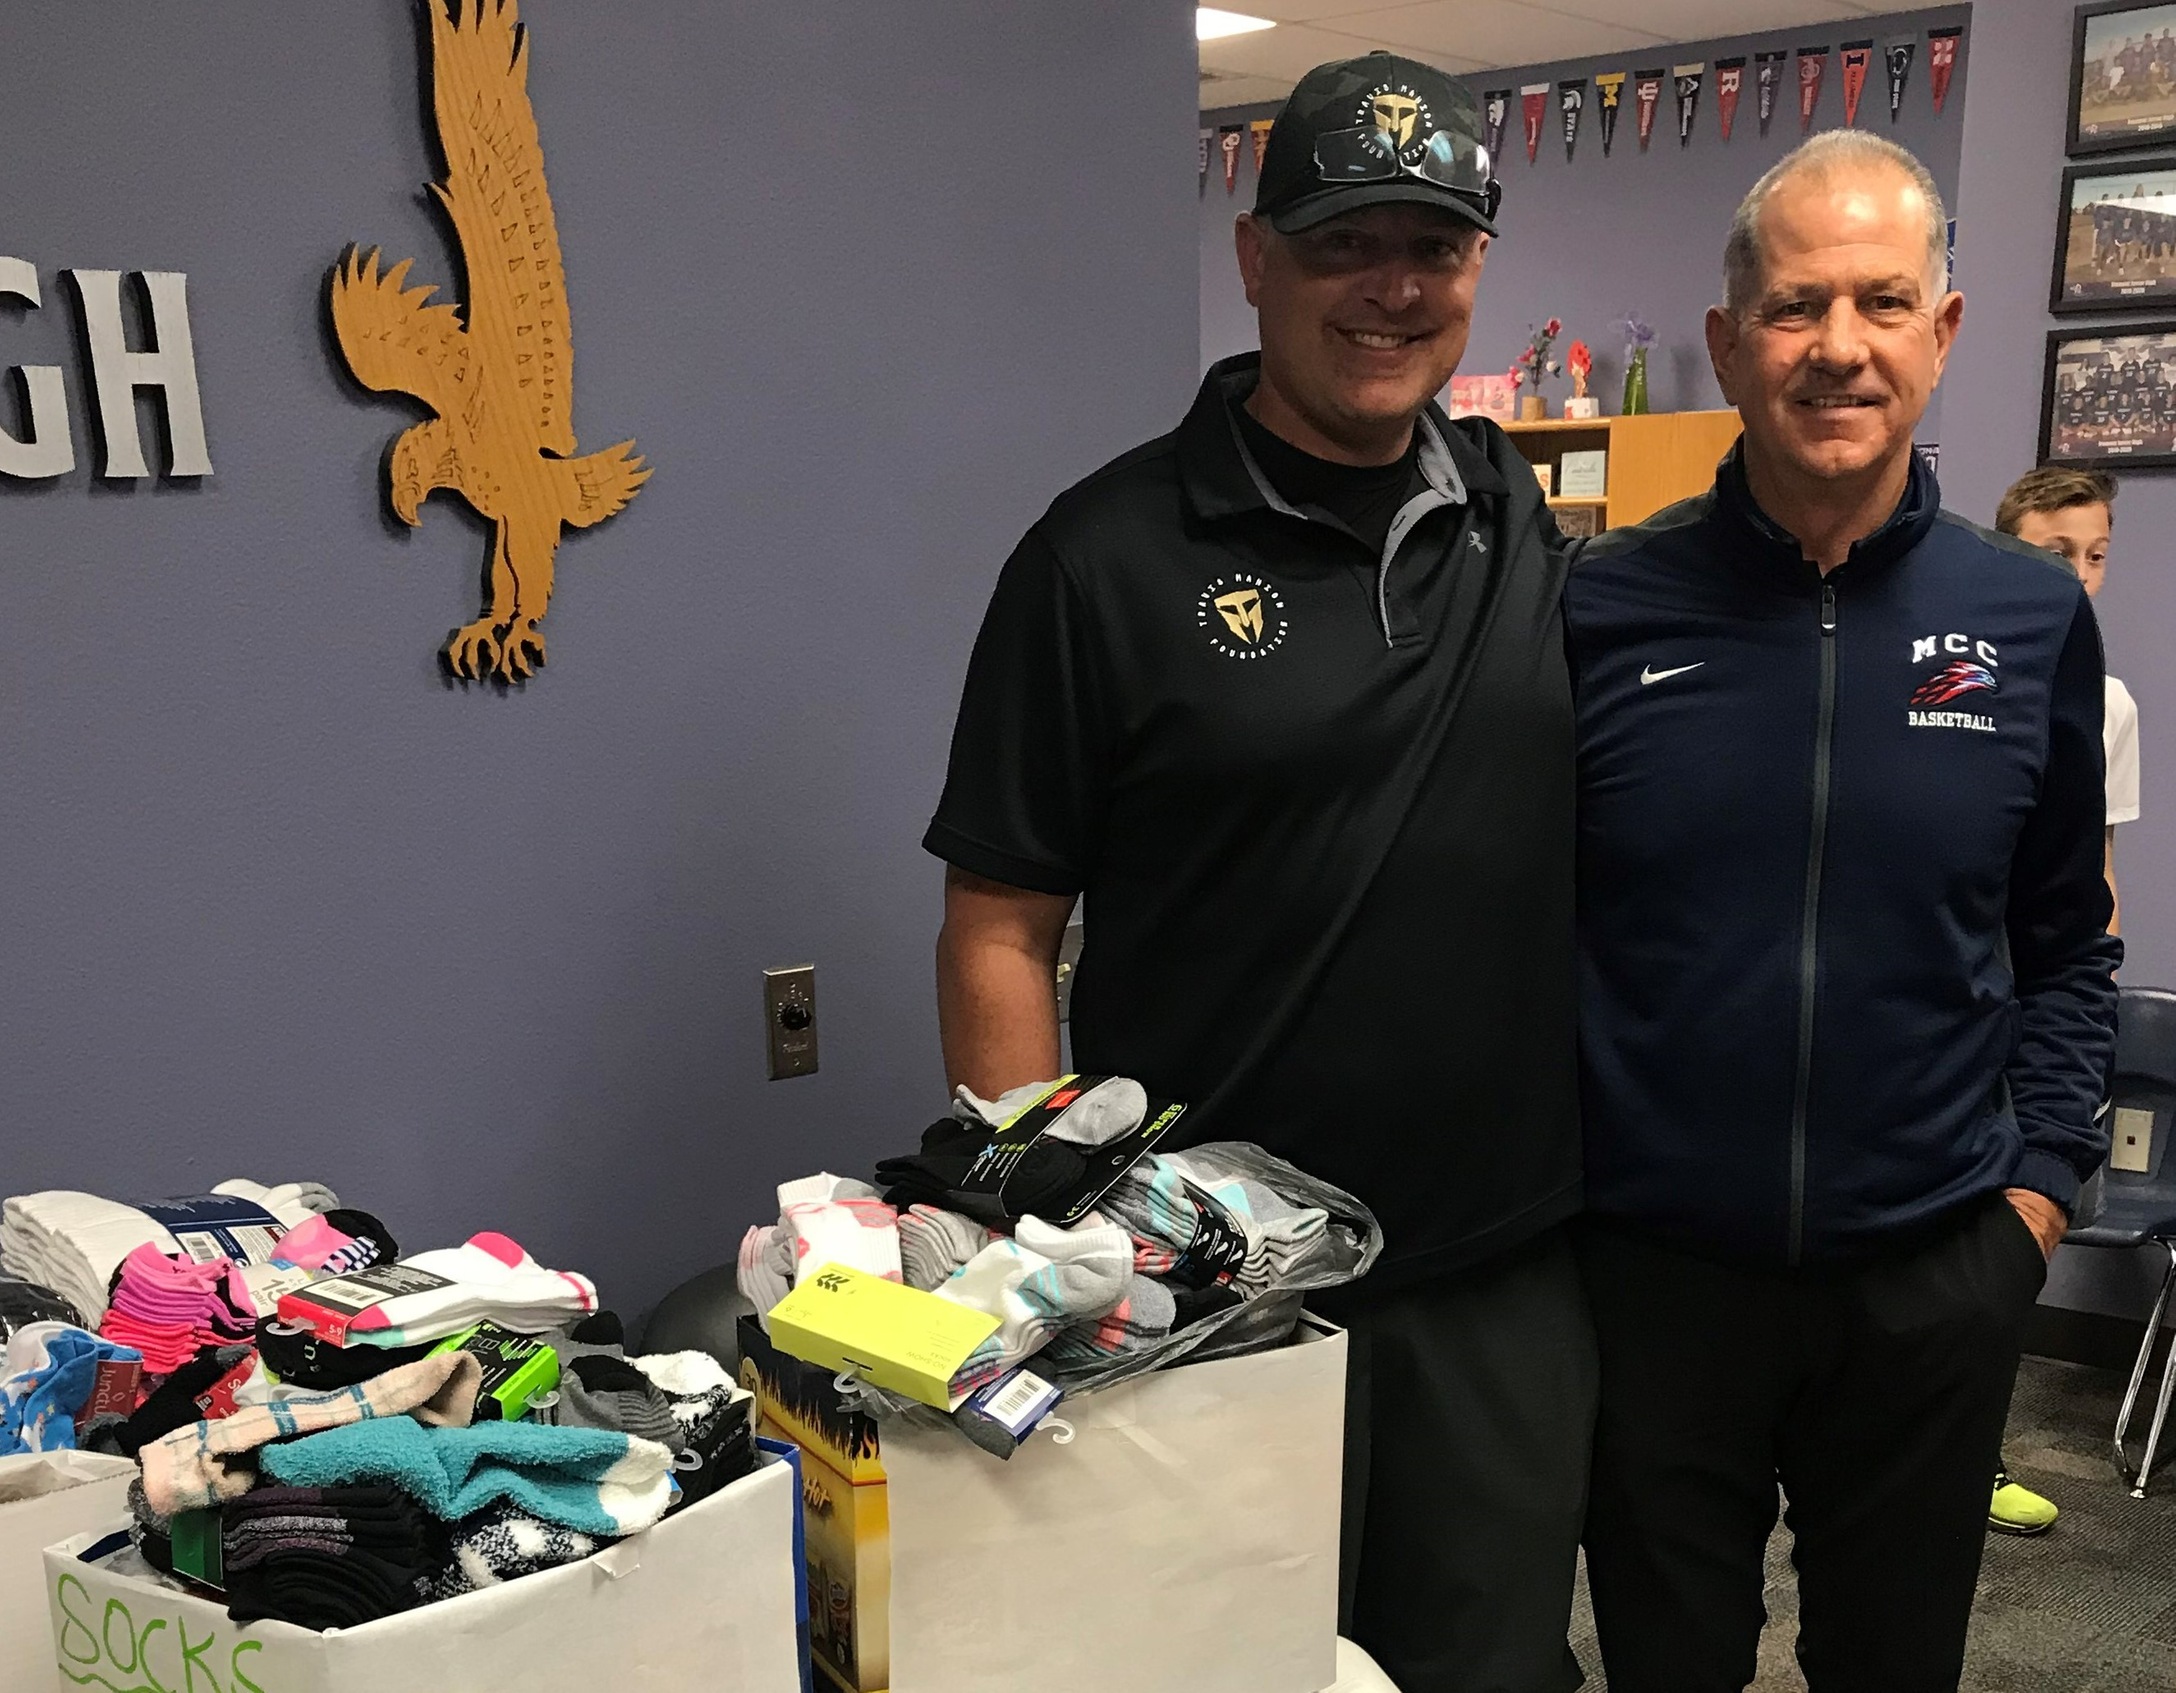 600 Pairs of Socks Donated During Sock Drive